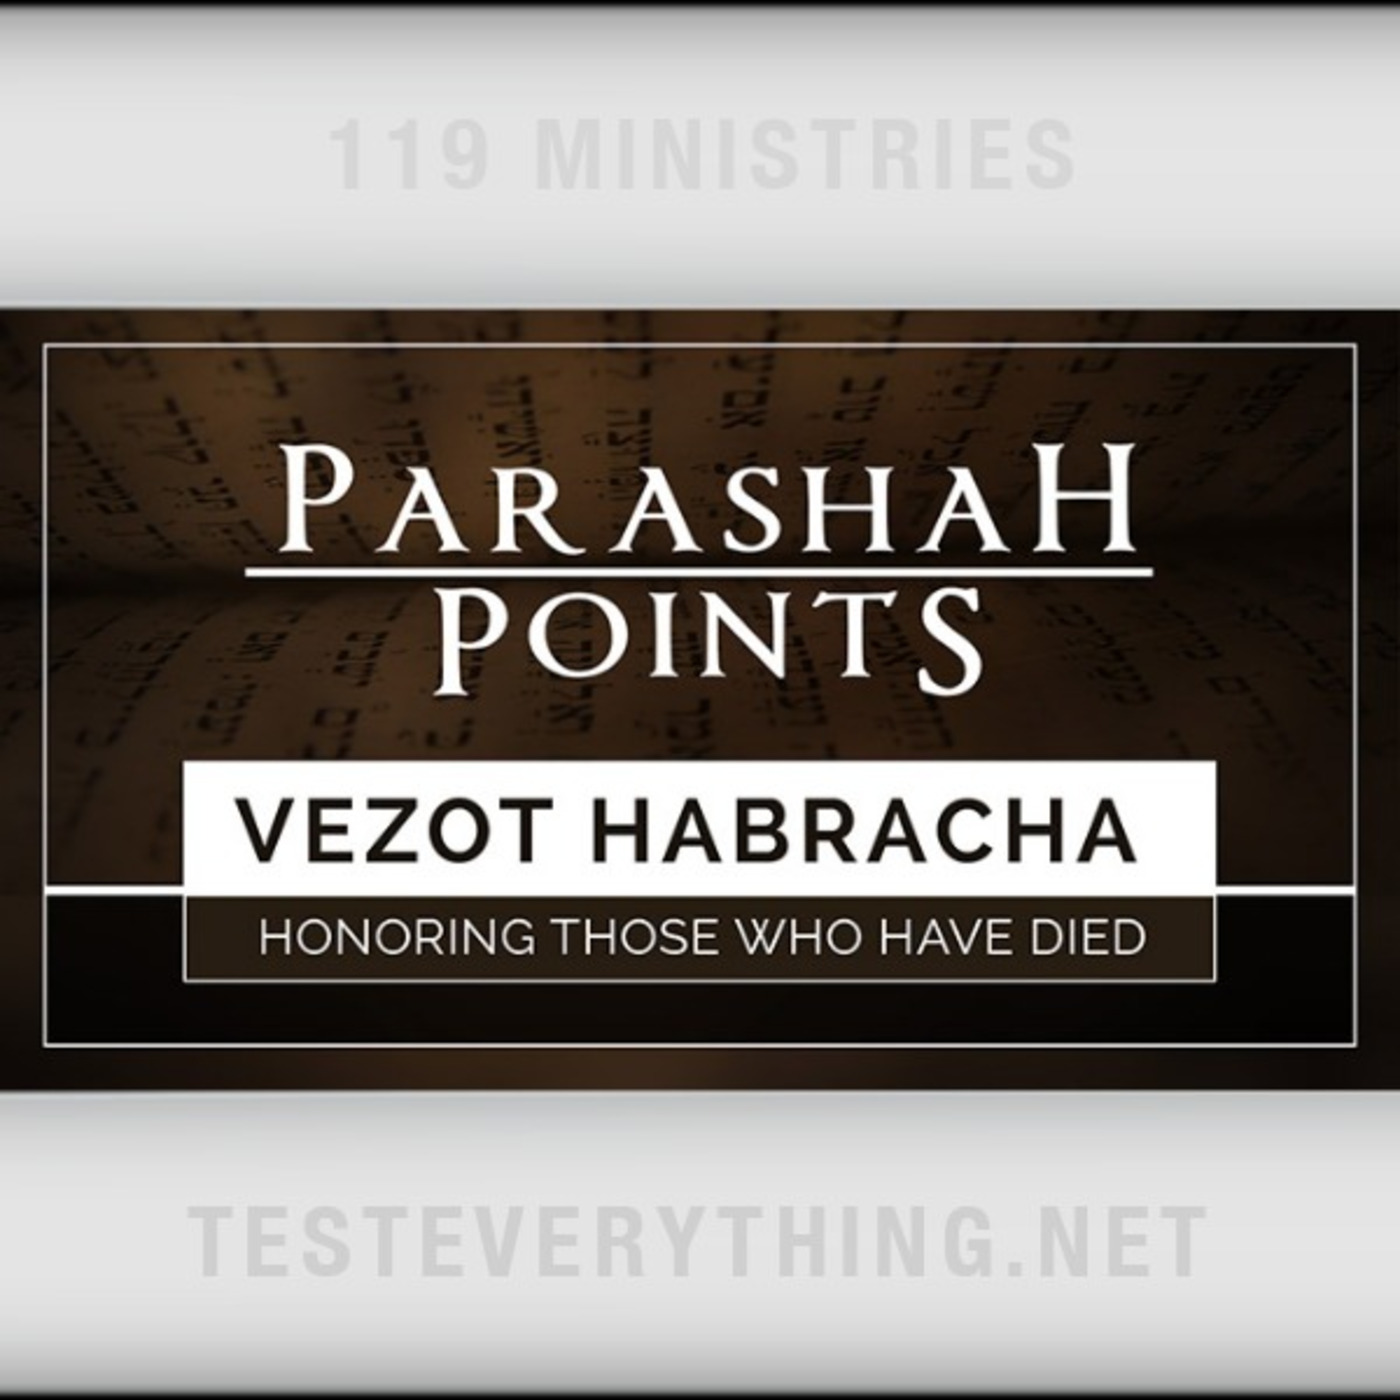 Parashah Points: Vezot Habracha - Honoring Those Who Have Died